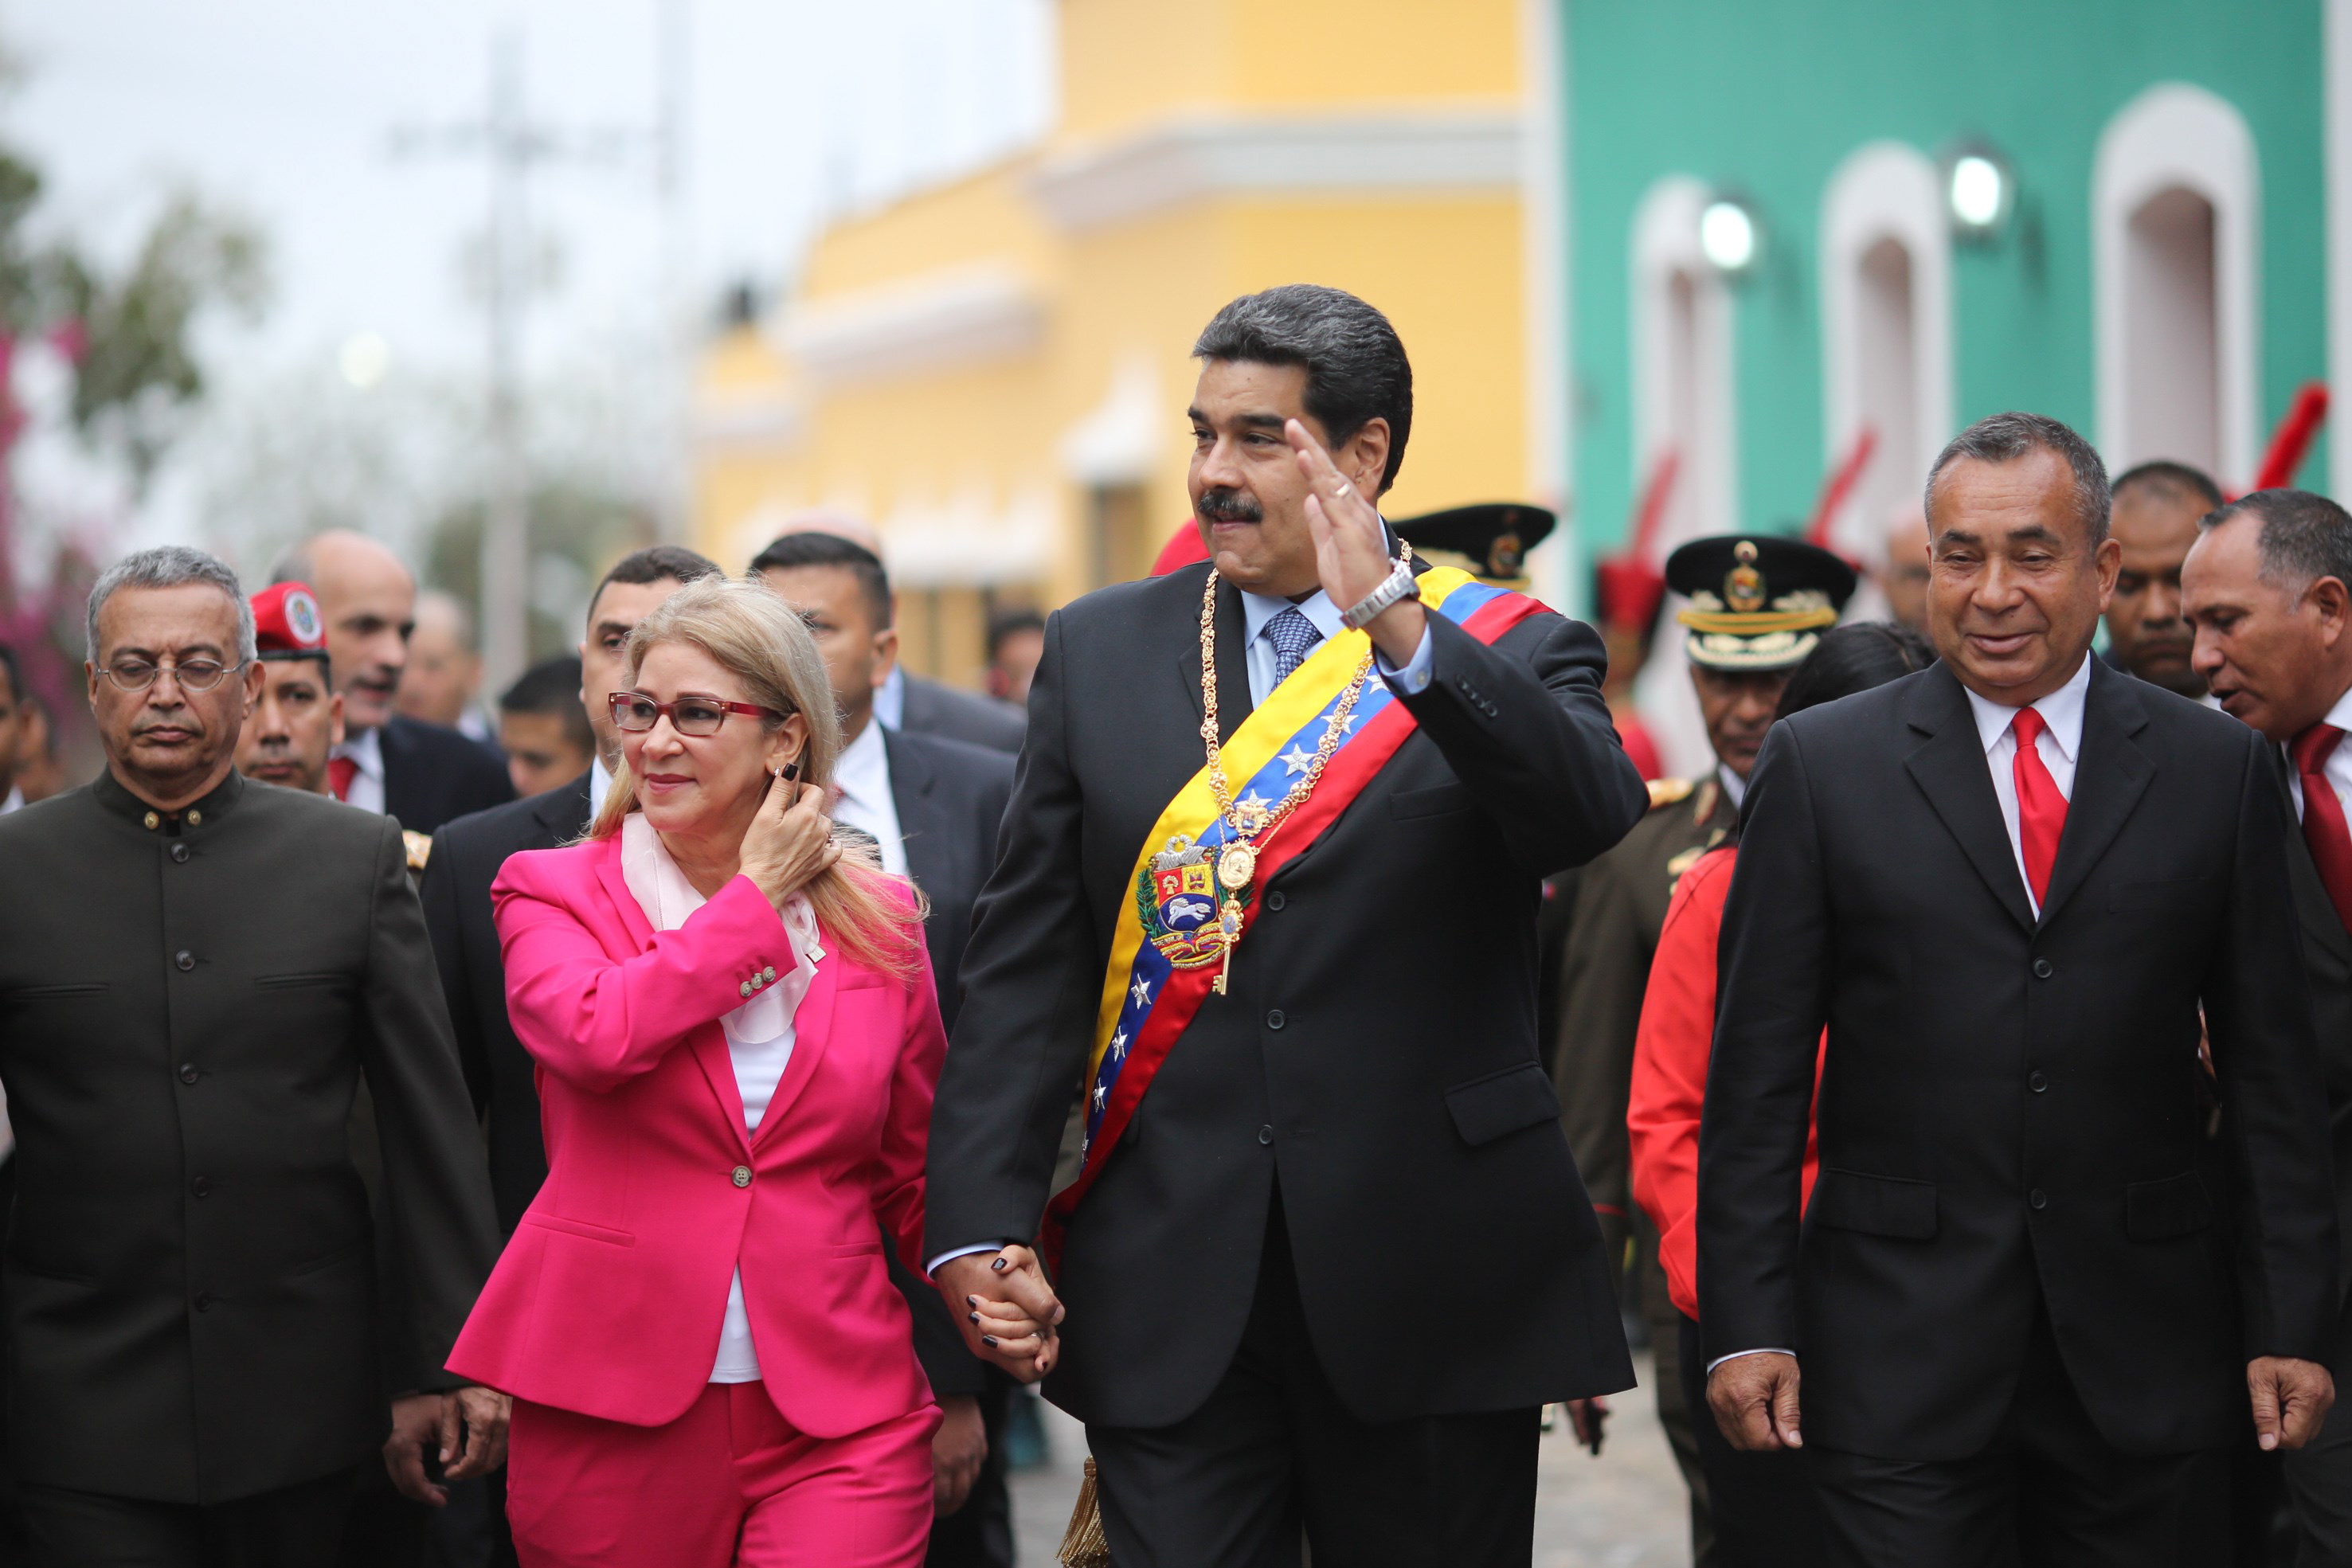 epa07372901 A handout photo made available by the Miraflores press office, shows the president of Venezuela, Nicolas Maduro (C), during the commemorative events of the Angostura Discourse Bicentennial, in Ciudad Bolivar, Venezuela, 15 February 2019. The commemorations are for the speech delivered by hero of independence Simon Bolivar on 15 February 1819, the day that the Angostura Congress was installed, within the framework of the independence wars of Venezuela and New Granada.  EPA/MIRAFLORES PRESS OFFICE HANDOUT  HANDOUT EDITORIAL USE ONLY/NO SALES